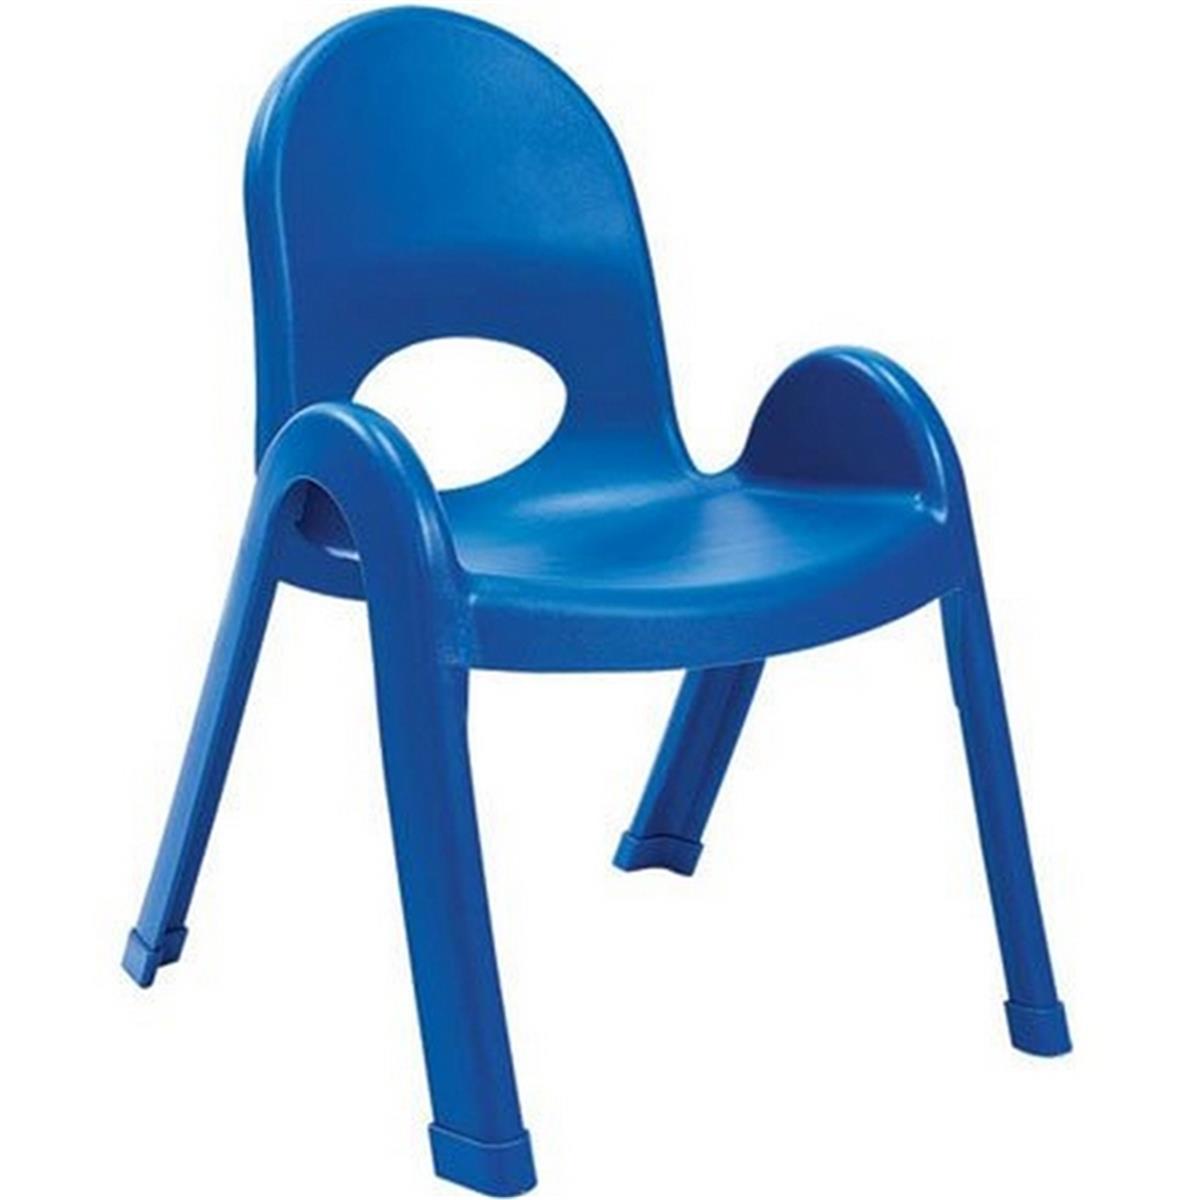 Angeles Ab7713pb 13 In. Value Stack Chairs, Royal Blue